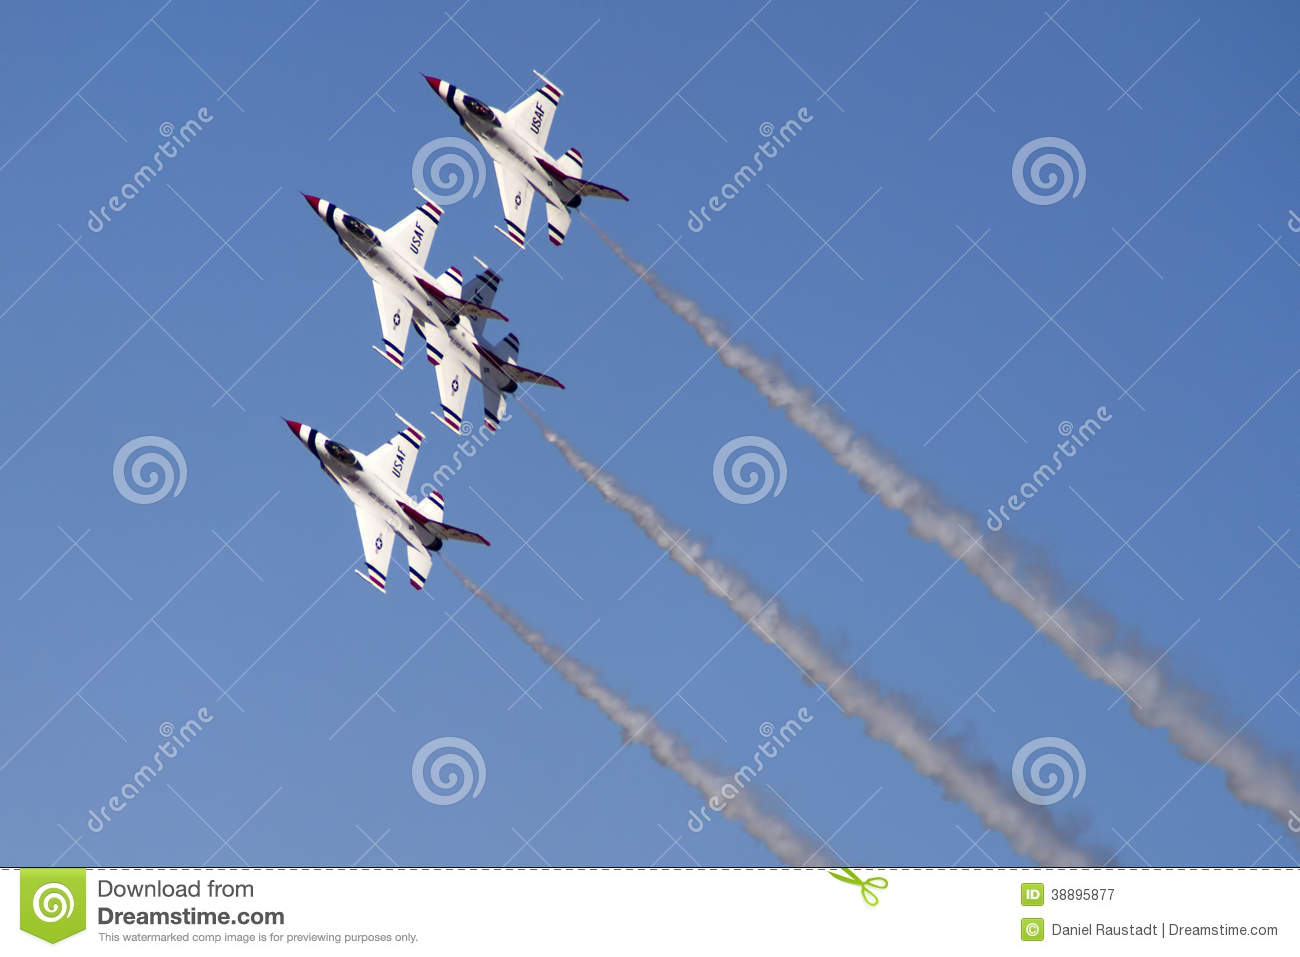 The United States Air Force Thunderbirds Air Demonstration Squadron